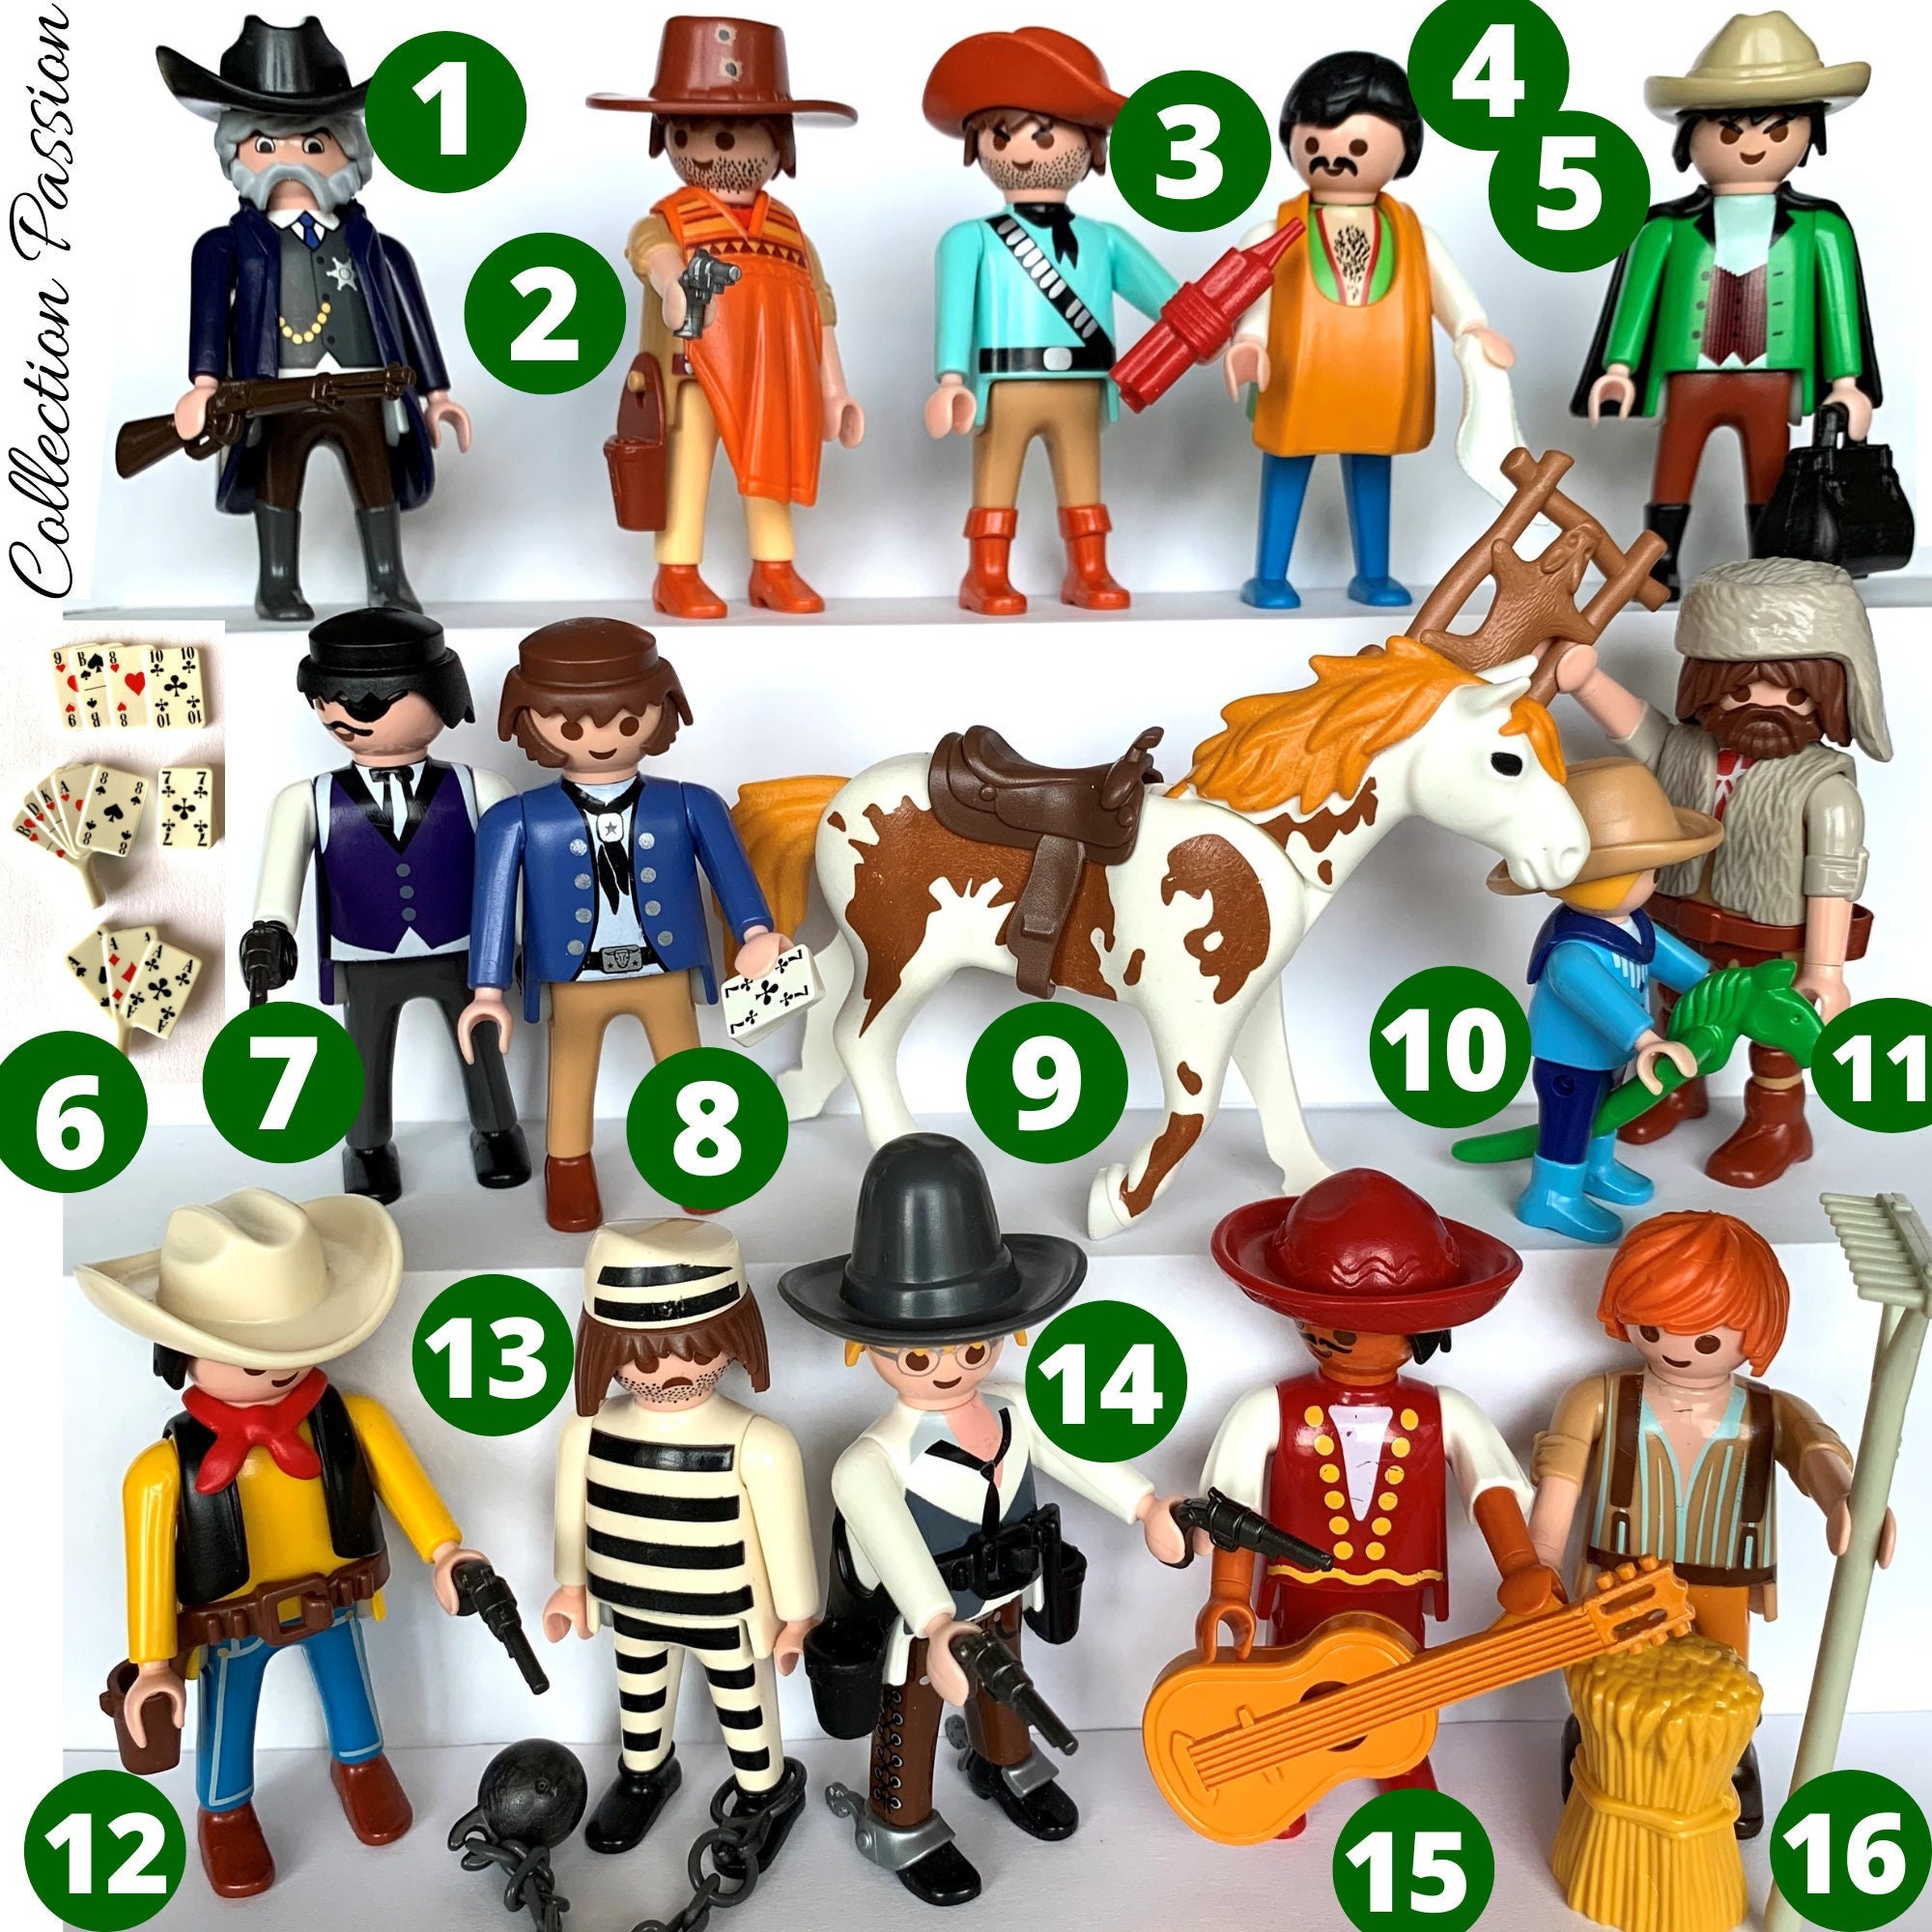 Pick One PLAYMOBIL Figure COWBOY Western Playmobile Vintage Figurines  Children Toys to Develop Their Imagination Play Lucky Luke 